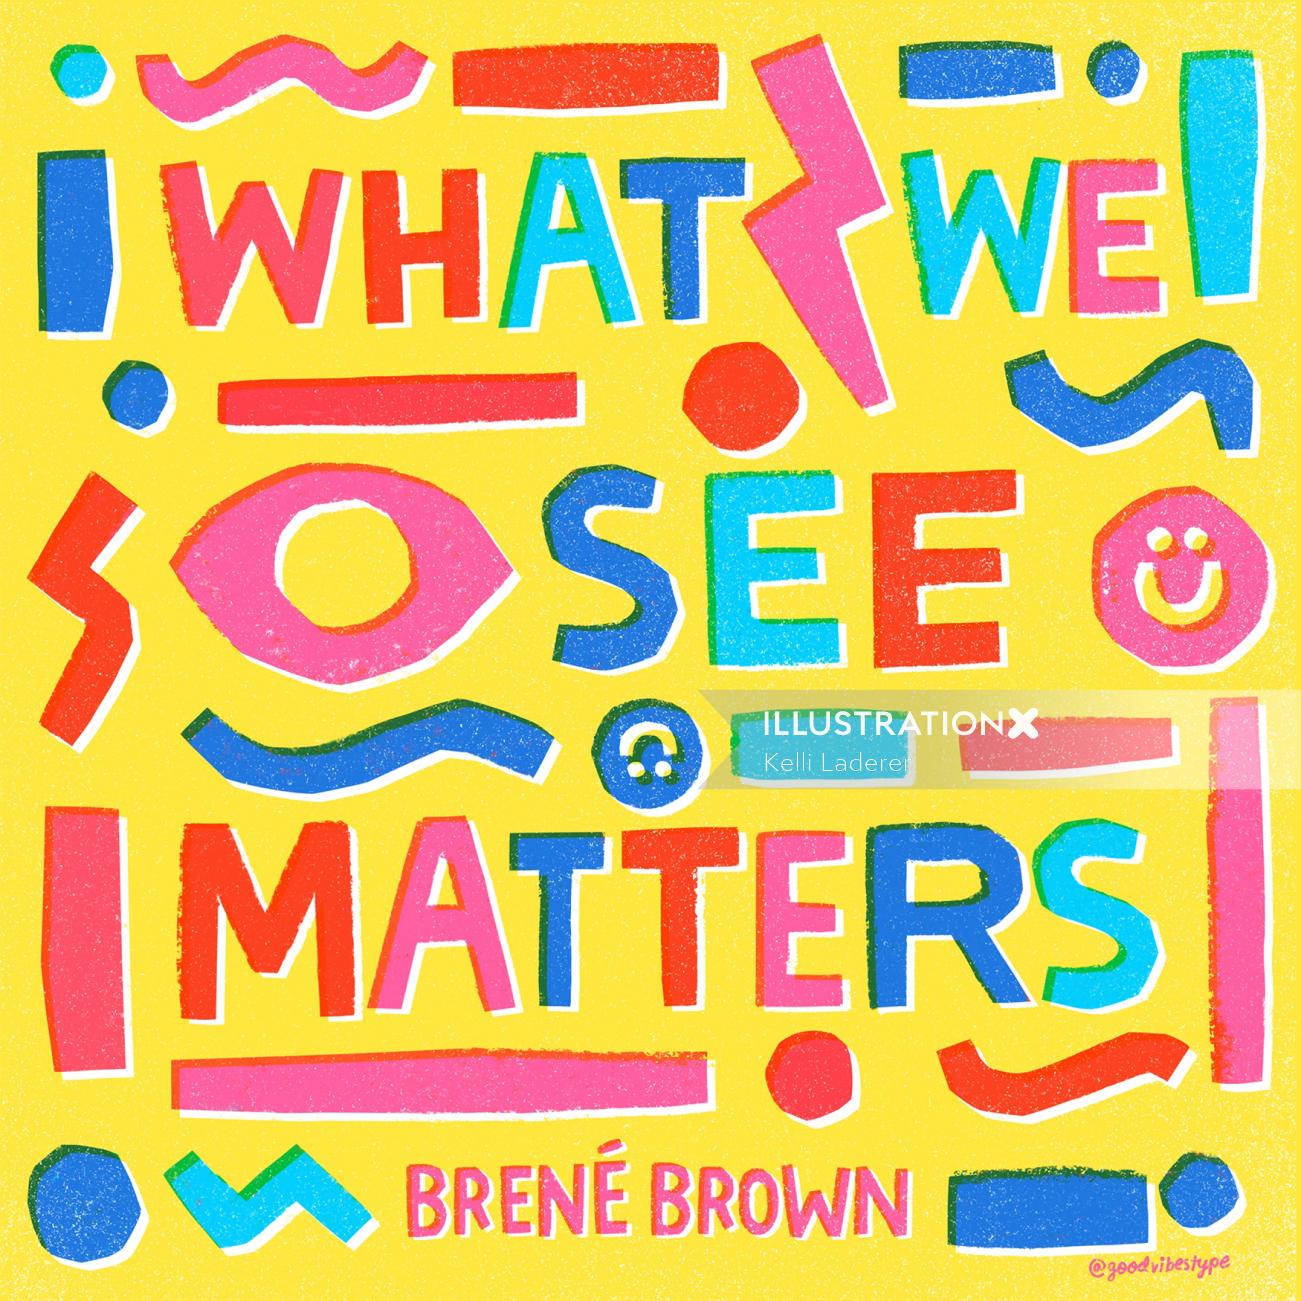 "What we see matters" by Brene Brown